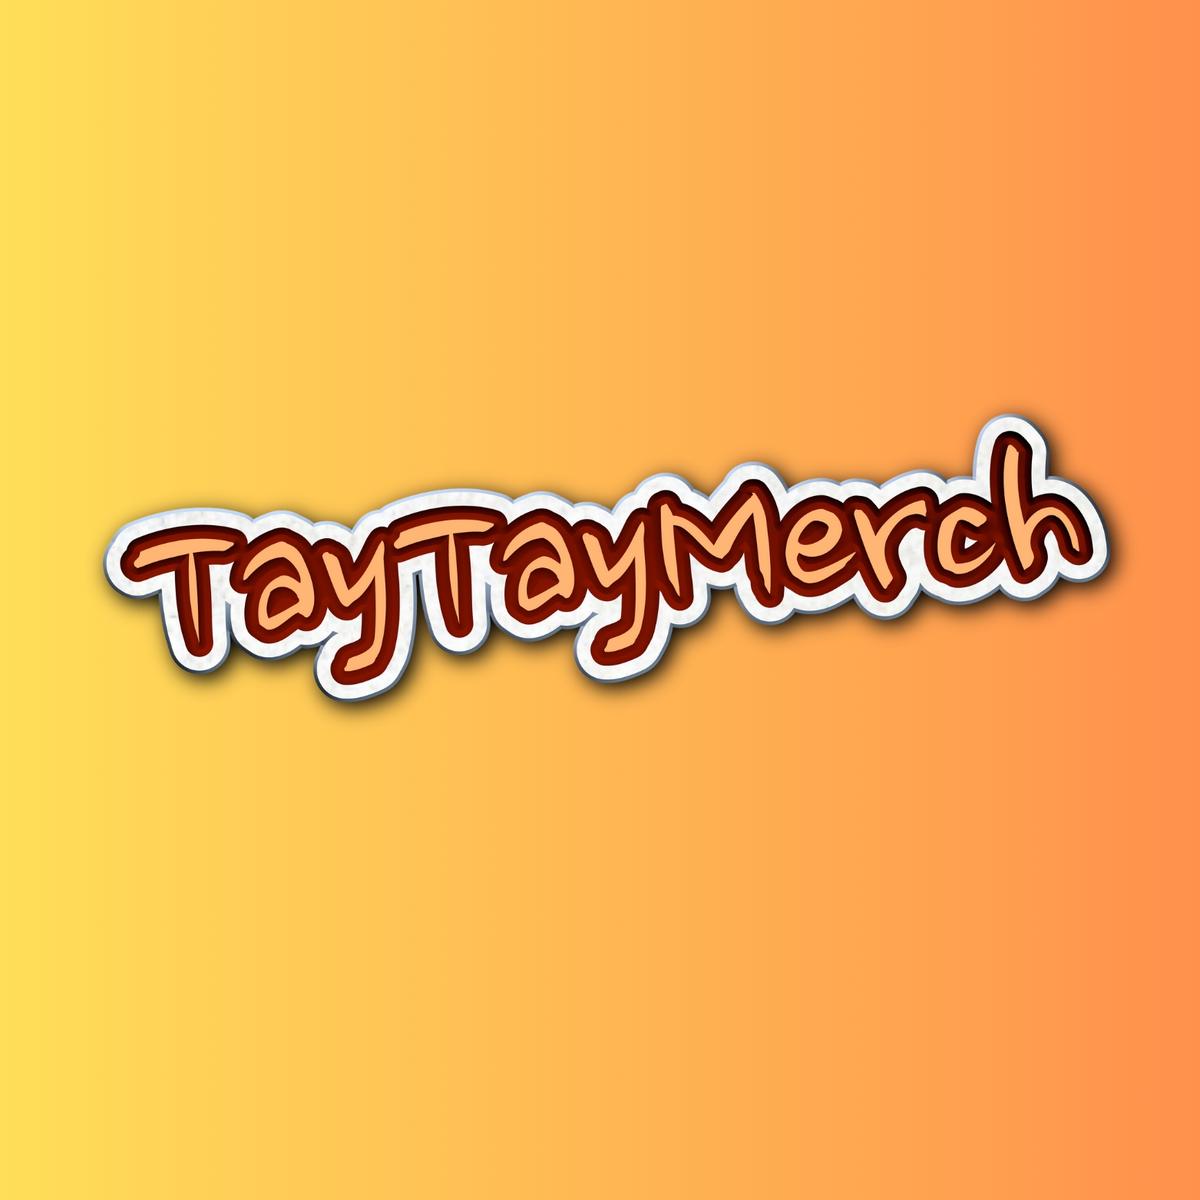 Taytaymerch's images